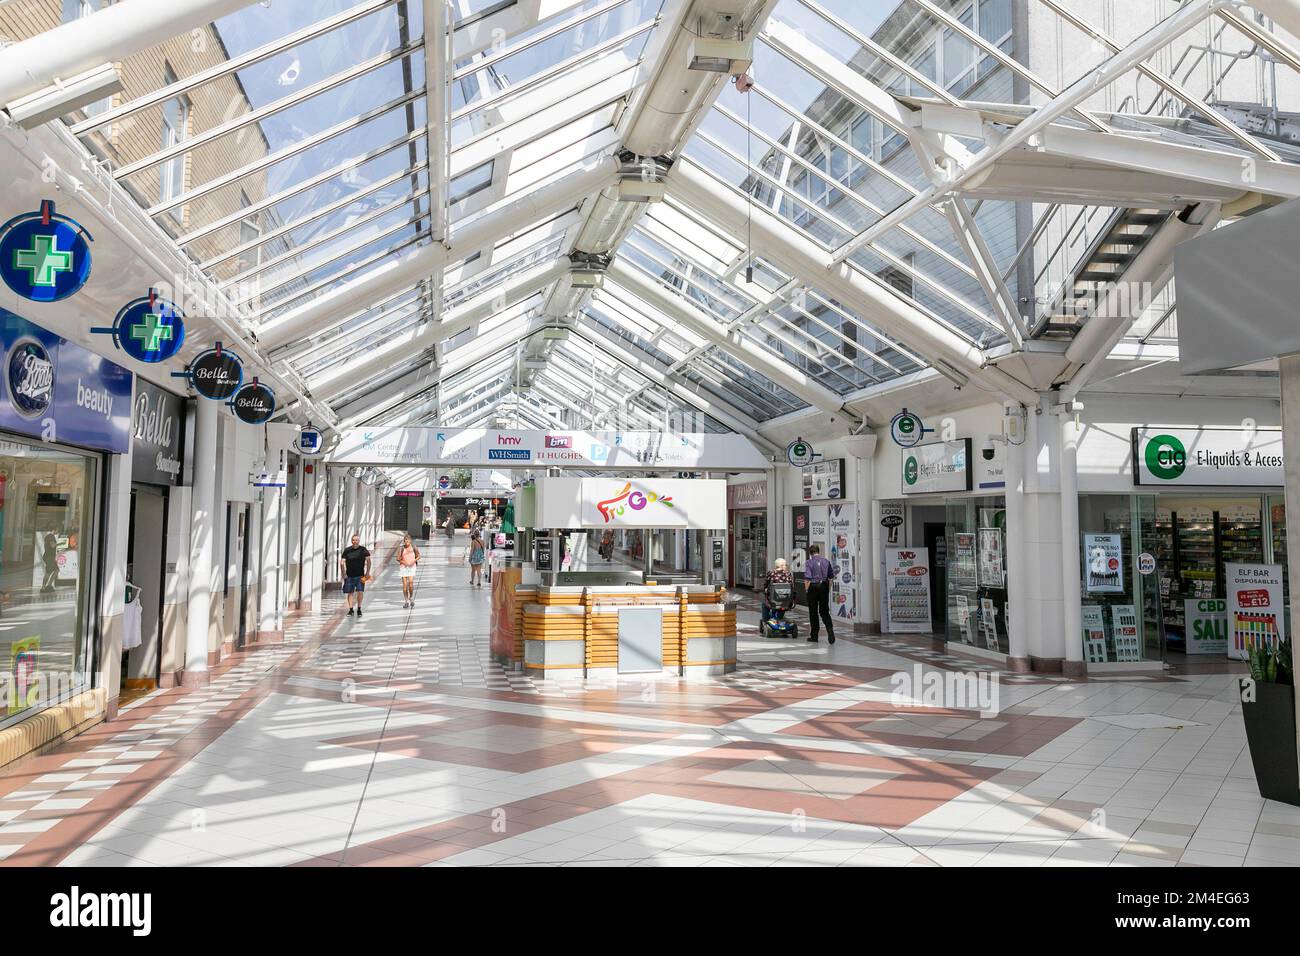 Mill Gate shopping mall centre in Bury, a market town in Greater Manchester, the mall is largely empty of people,England,UK,2022 Stock Photo